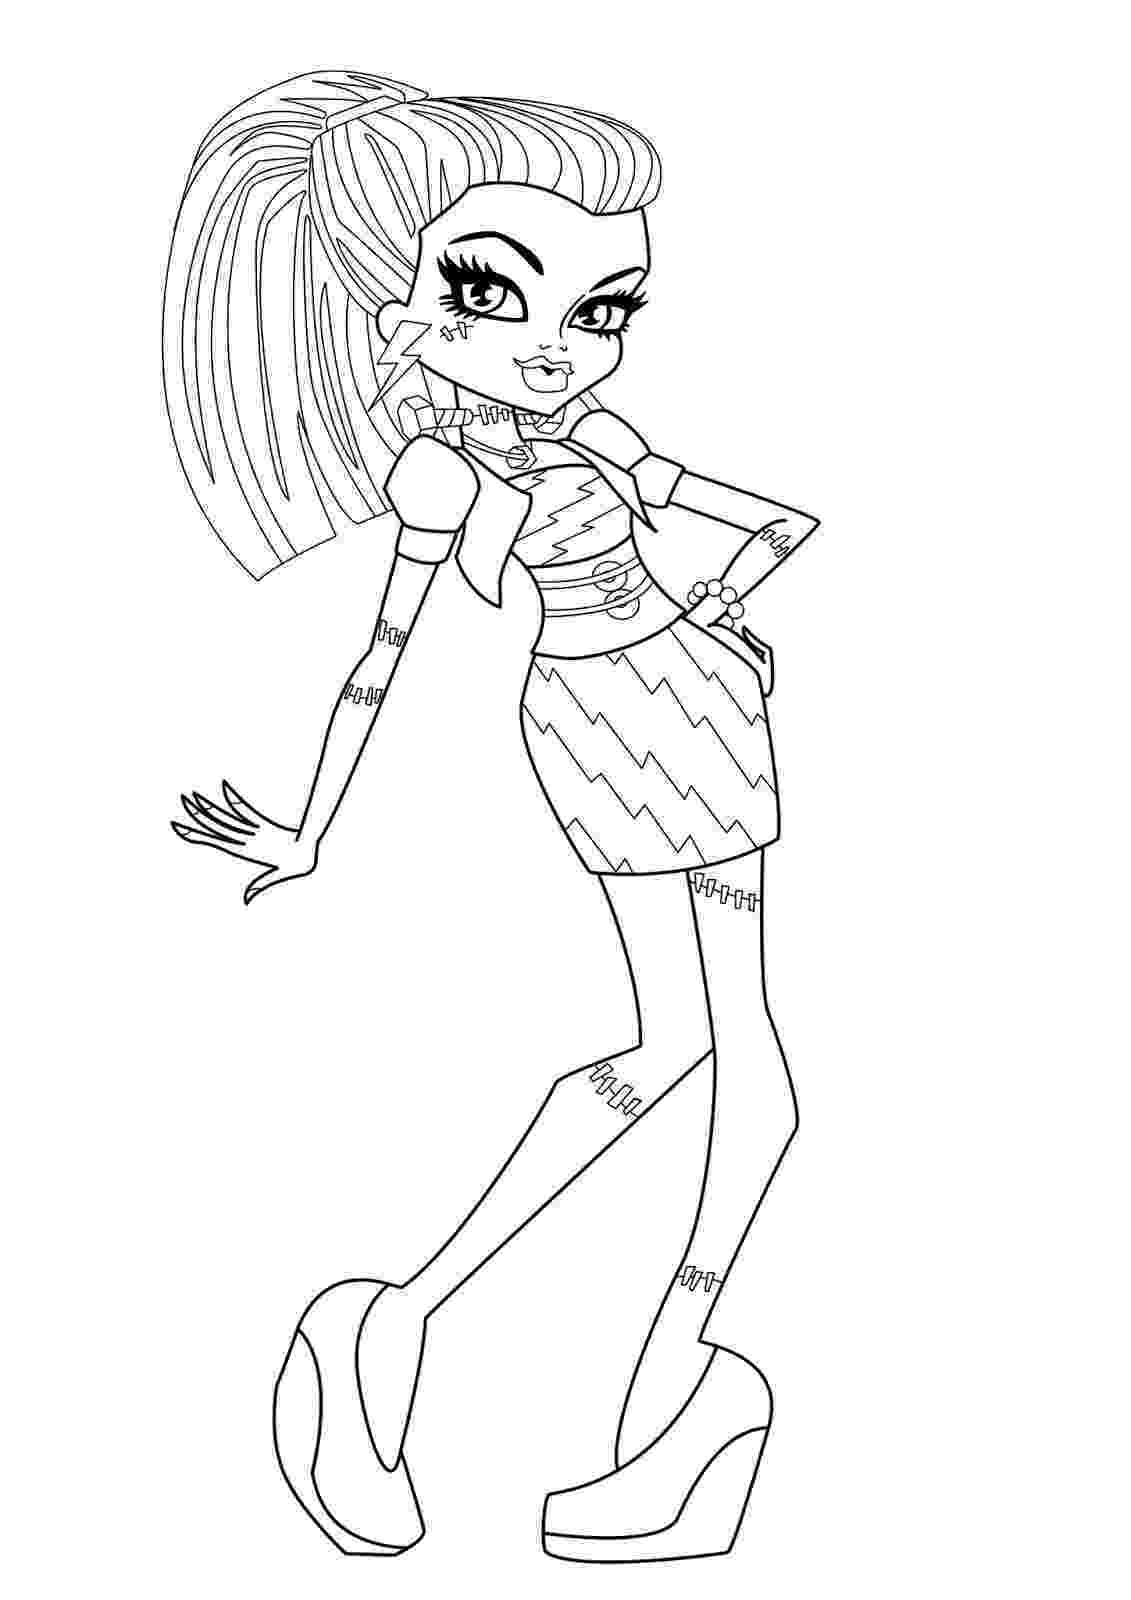 monster high black and white coloring pages girl clawdeen wolf coloring page monster high high monster pages black white and coloring 